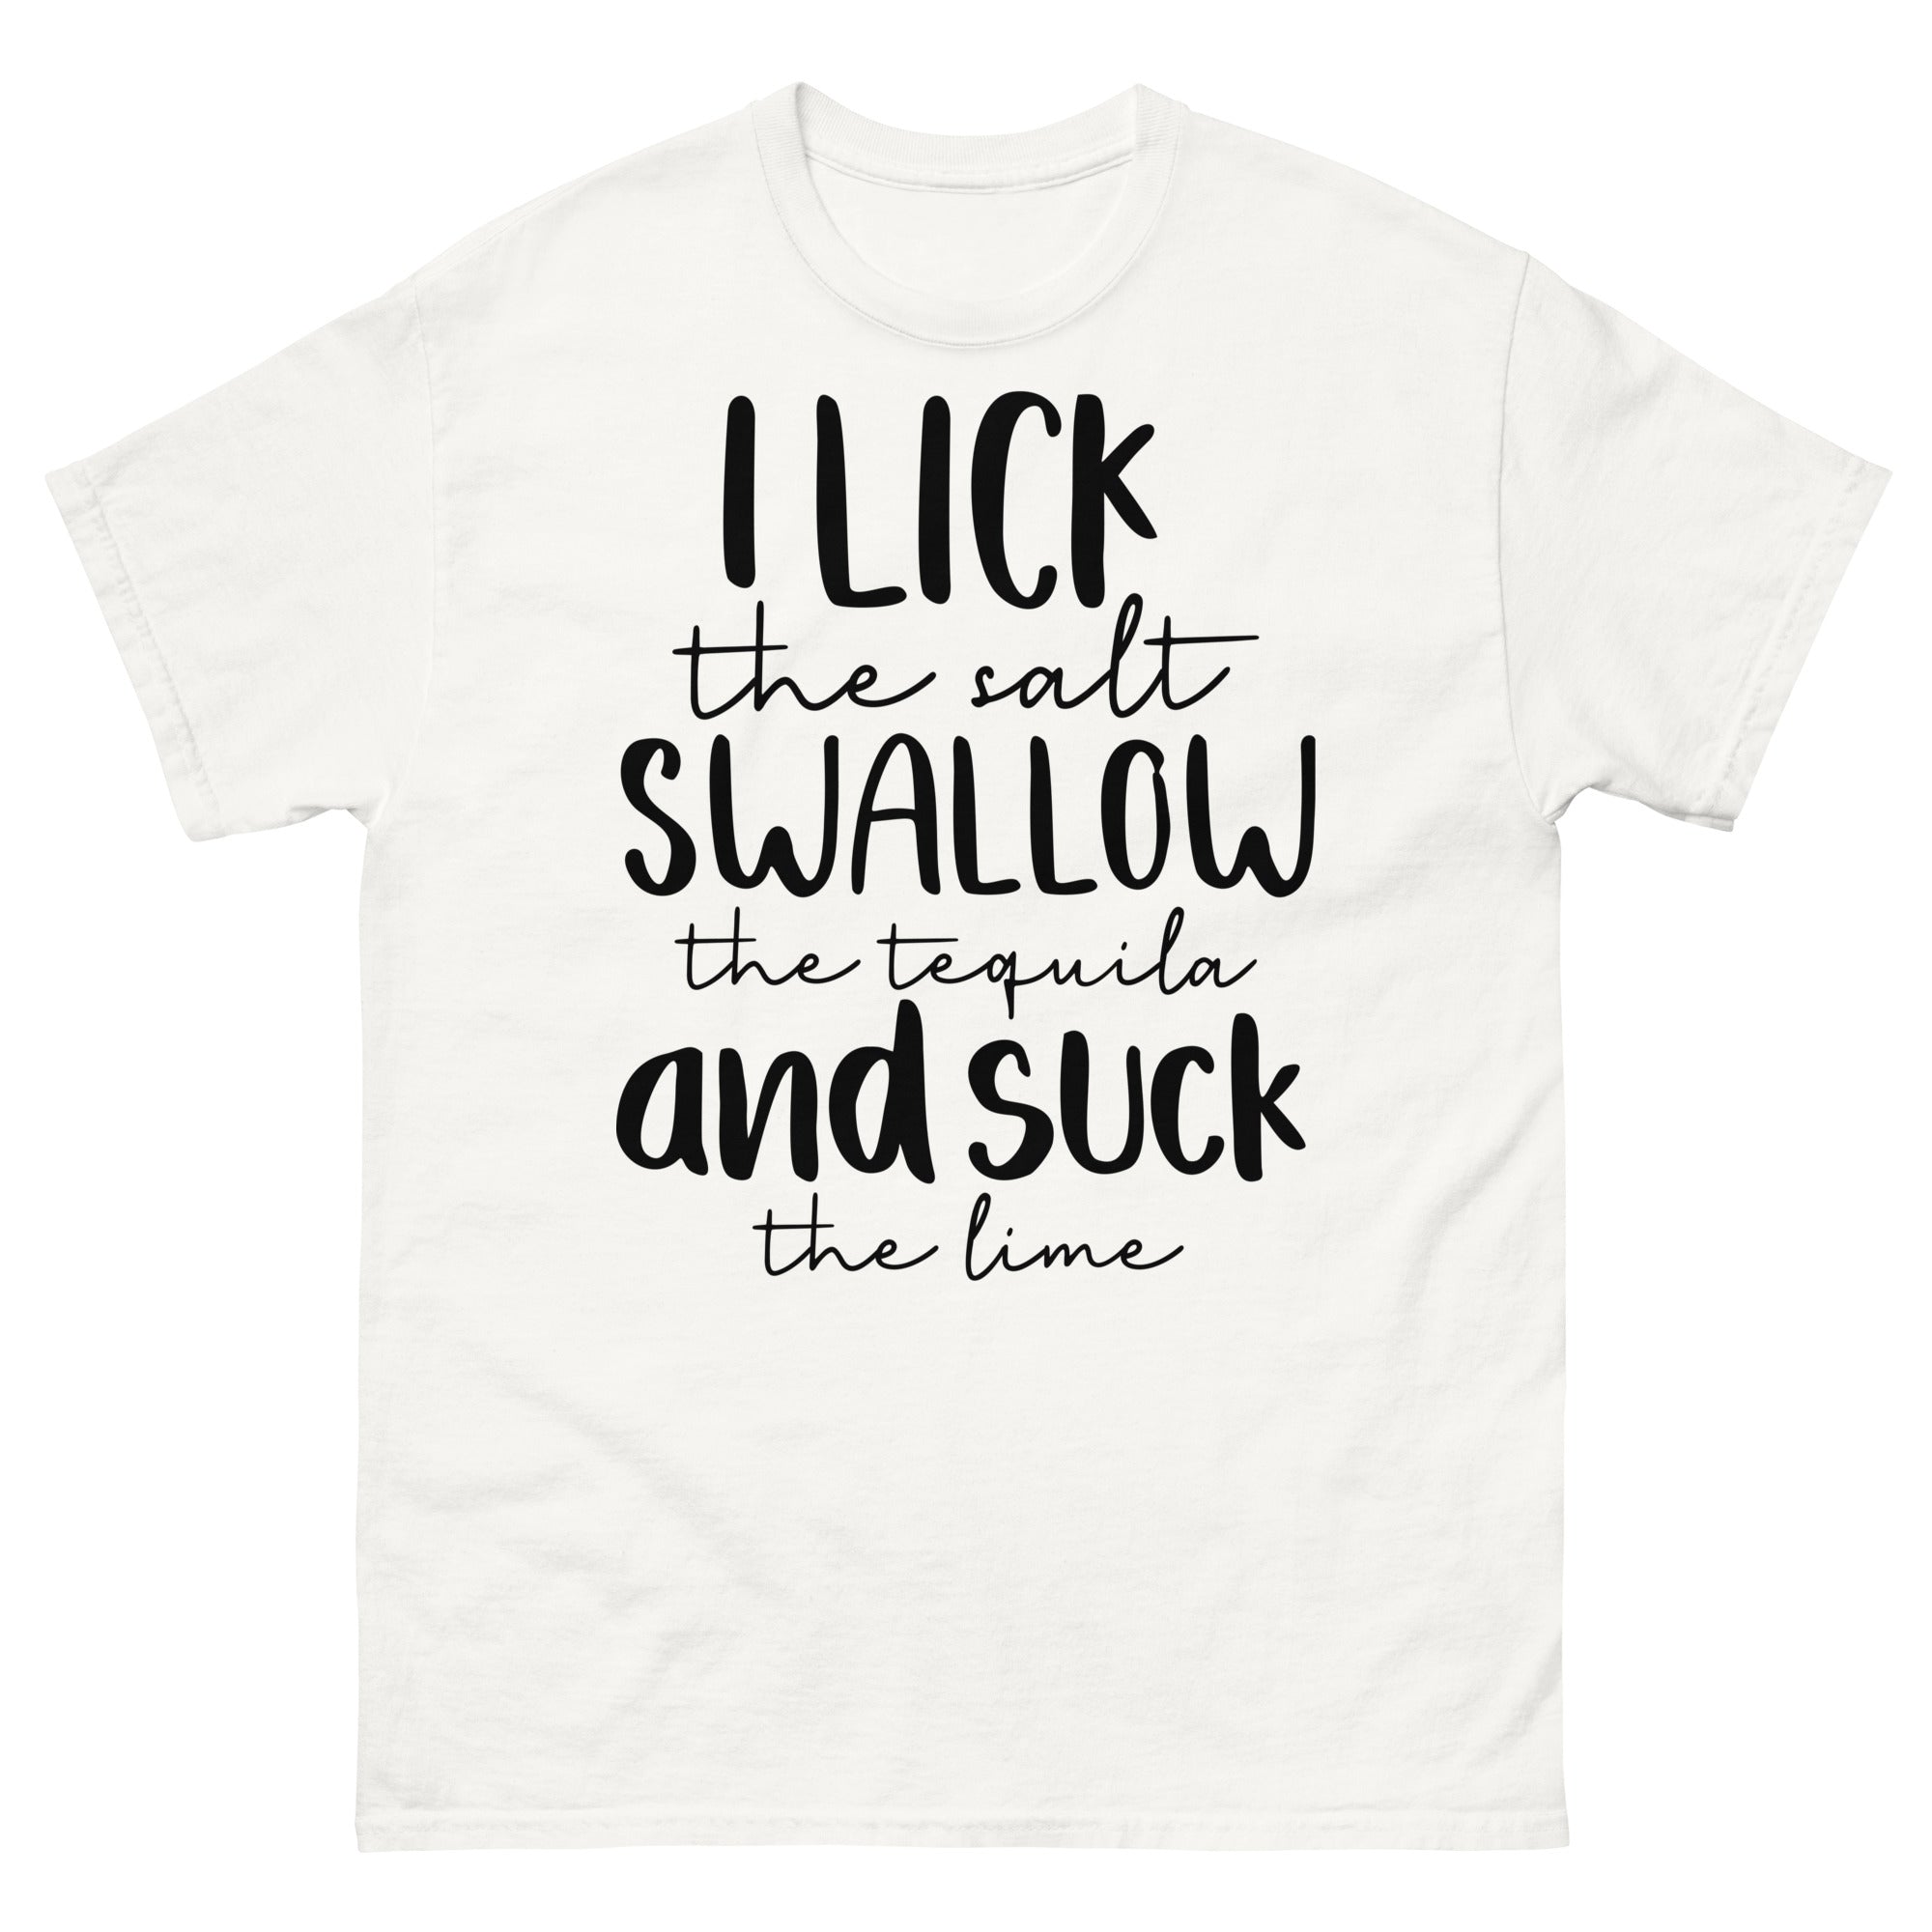 Lick, Swallow and Suck T-Shirt